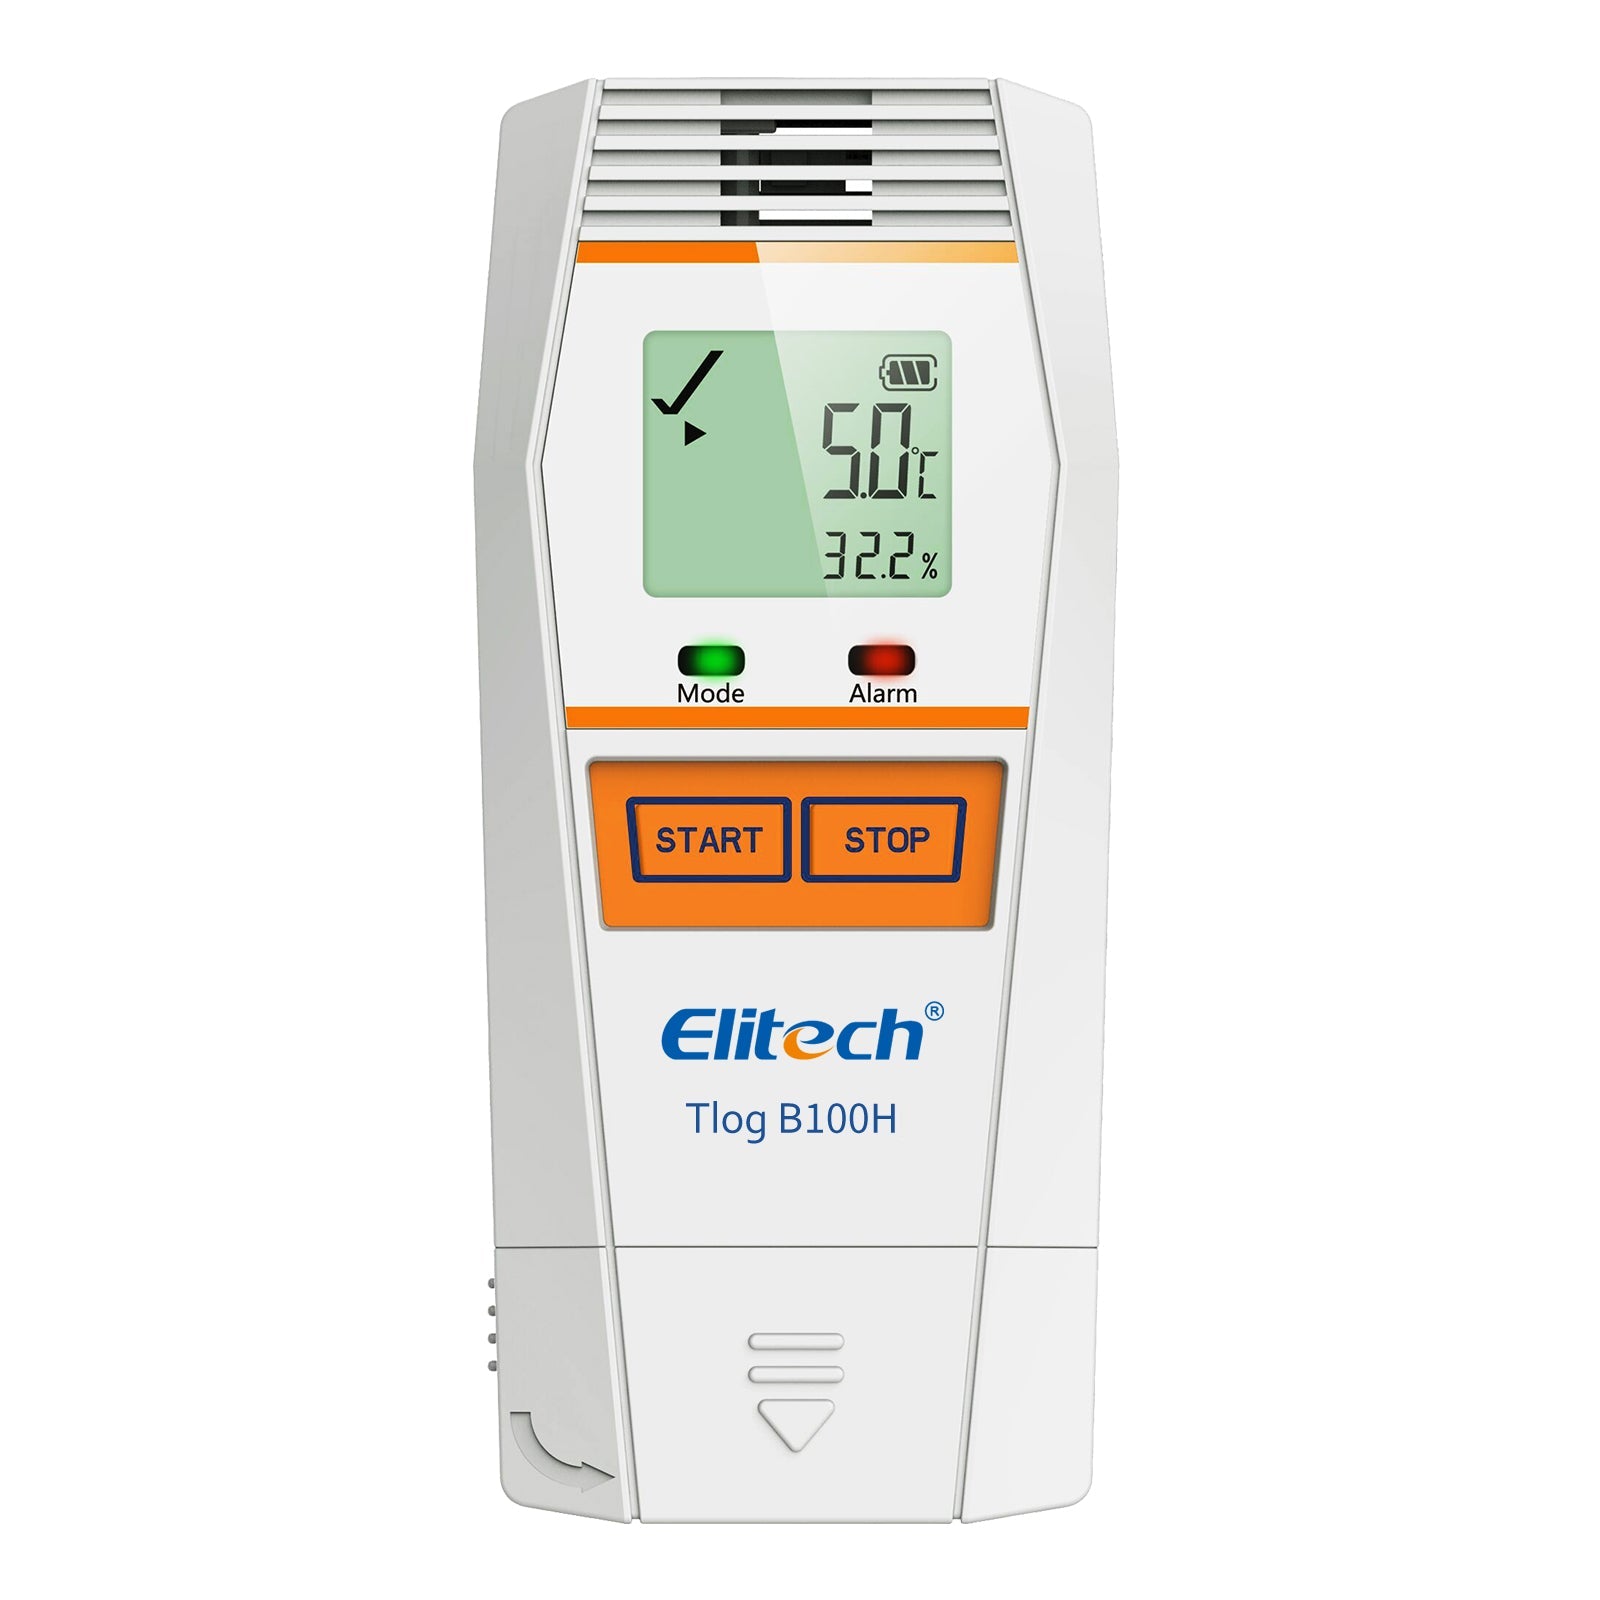 Elitech Tlog B100H Wireless Temperature and Humidity USB Transport Data Logger with LCD Display - Elitech Technology, Inc.